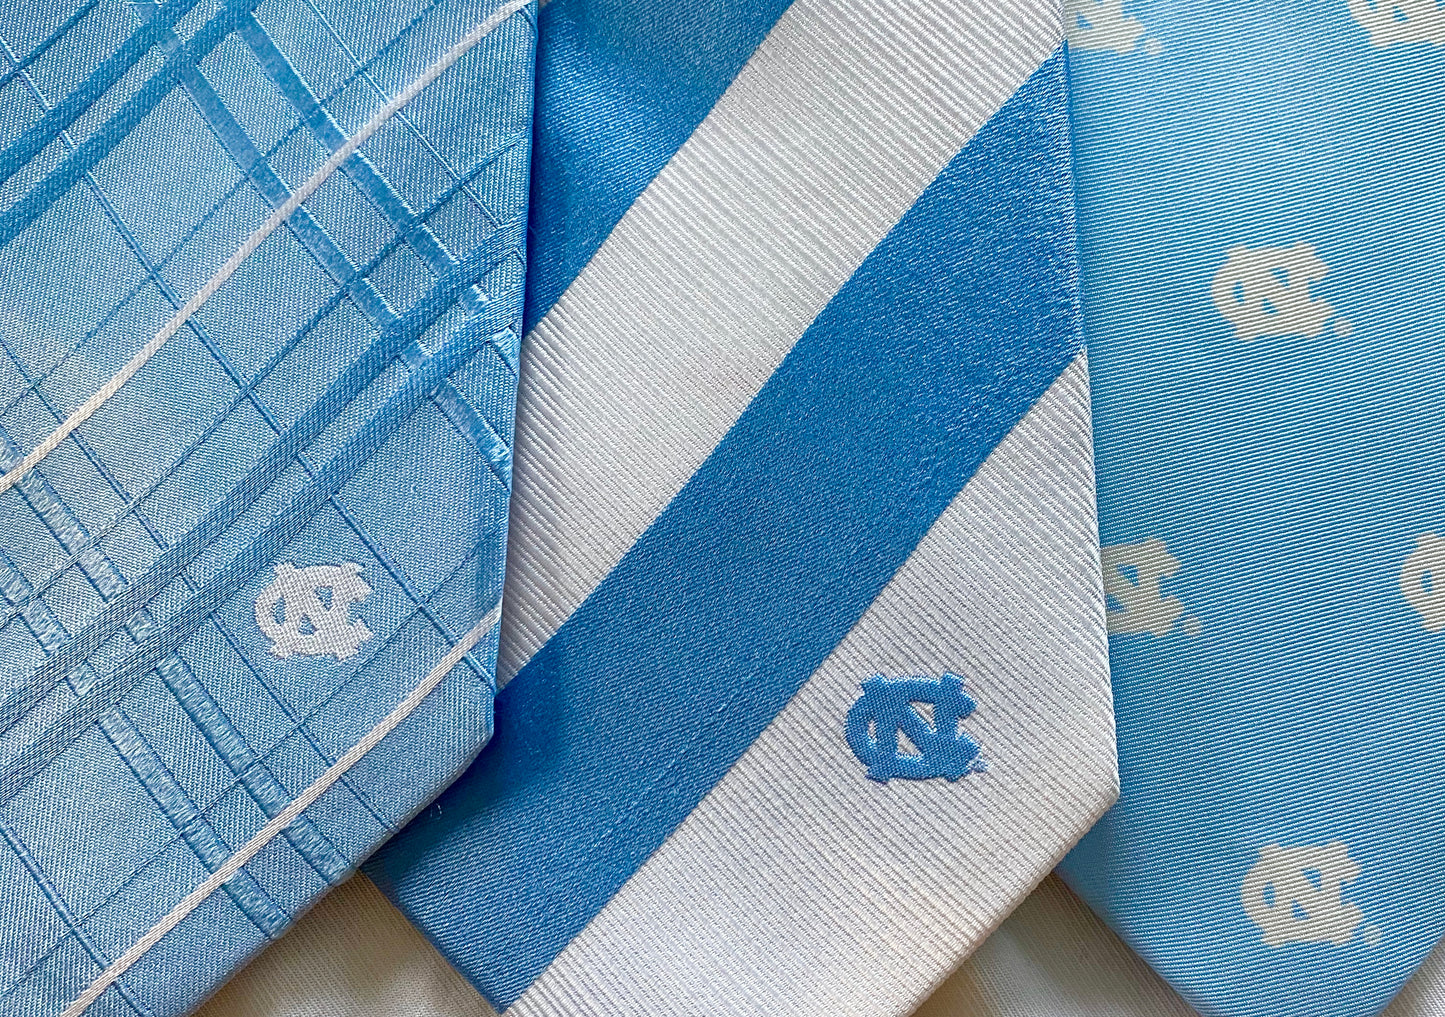 UNC Oxford Woven Men’s Tie by Eagles Wings